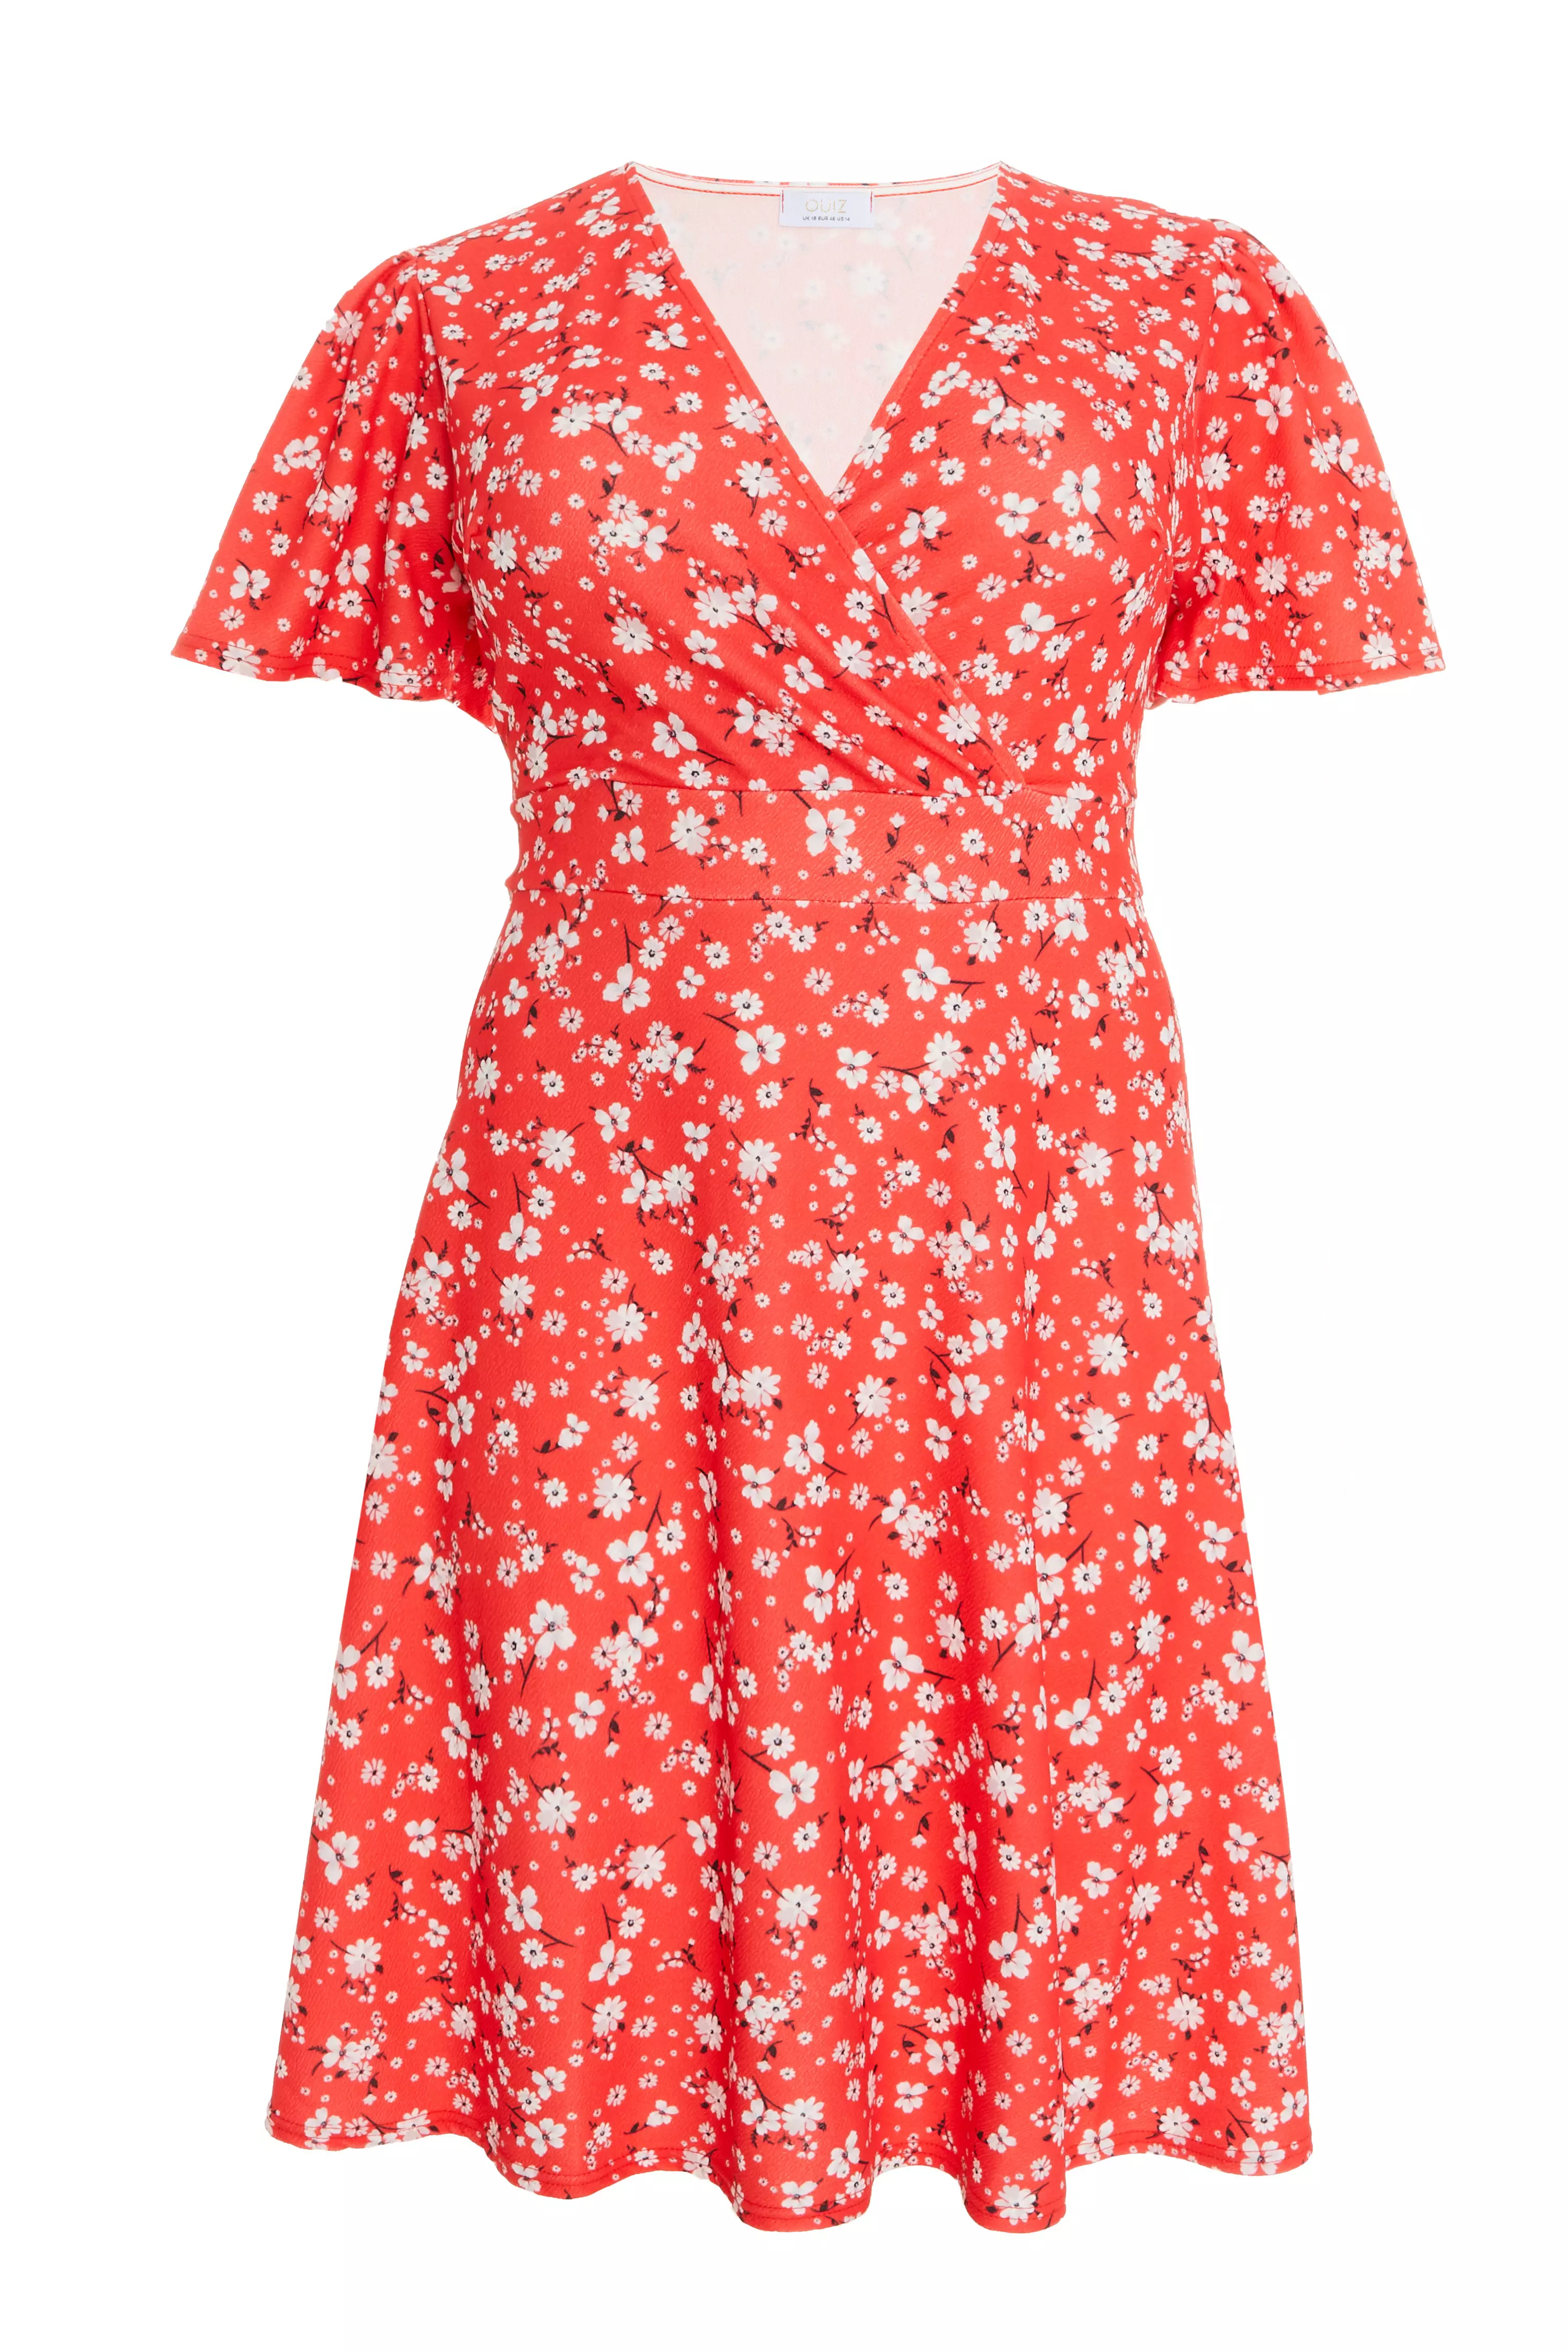 Curve Red Ditsy Floral Midi Skater Dress - QUIZ Clothing